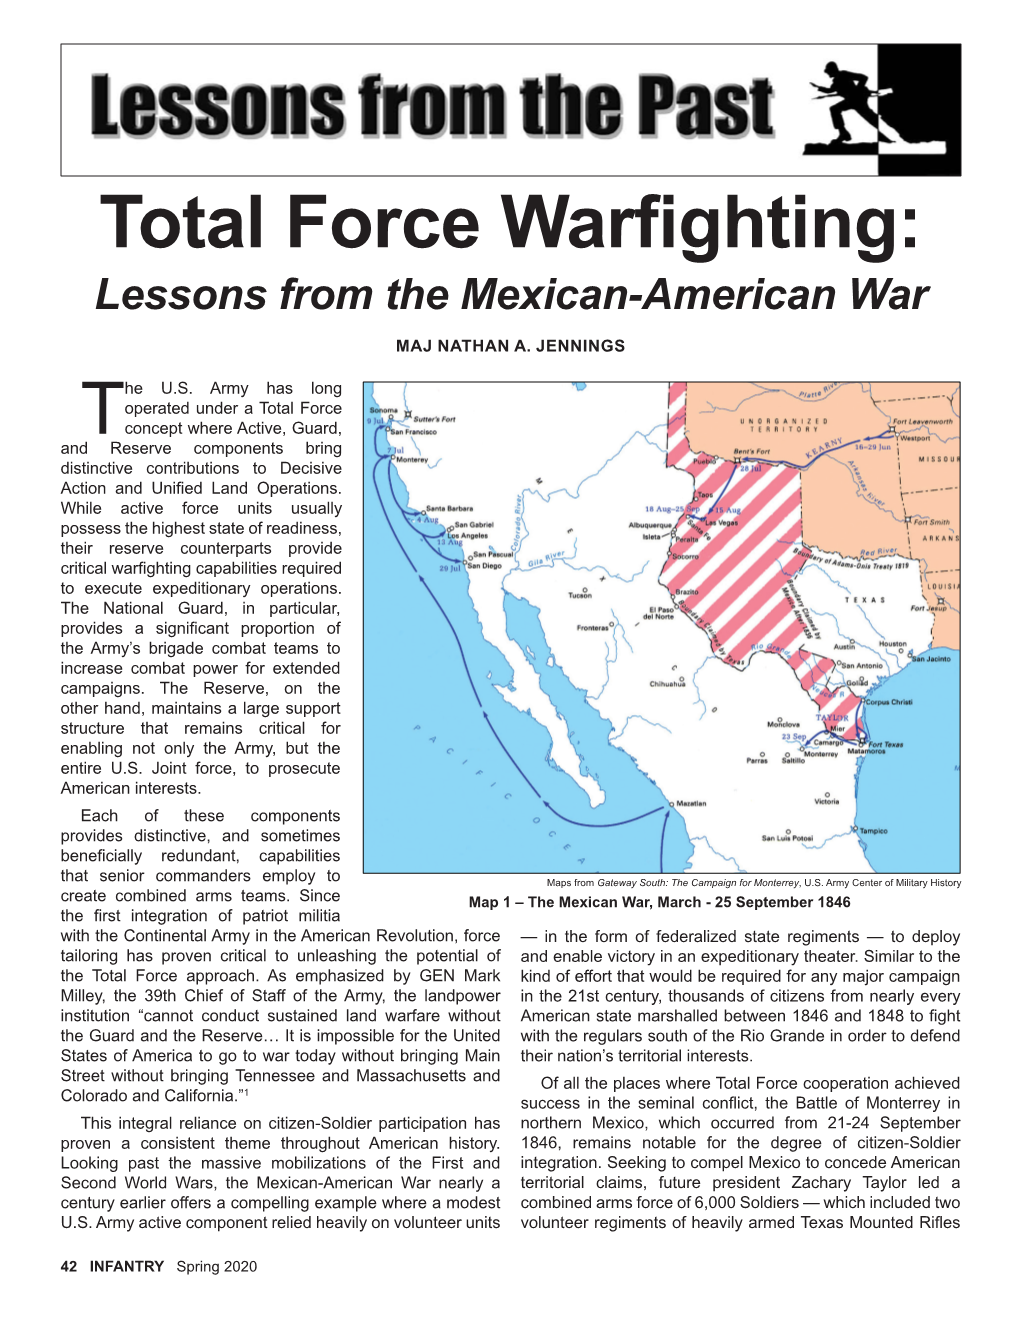 Total Force Warfighting: Lessons from the Mexican-American War MAJ NATHAN A